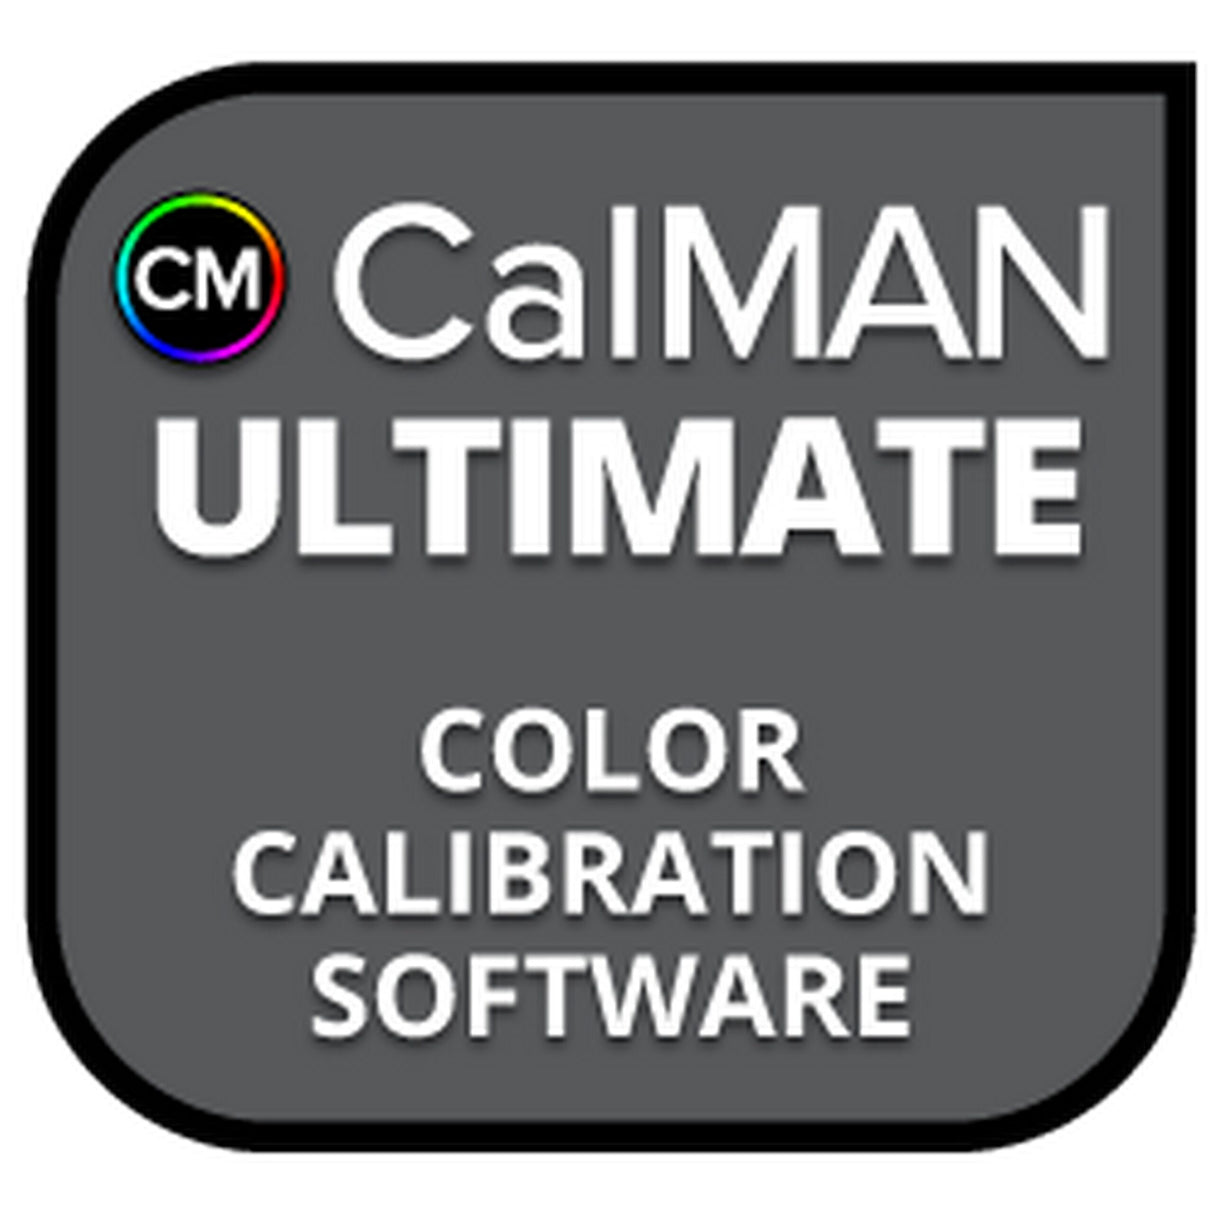 SpectraCal CalMAN Ultimate Color Calibration Software, Download Only